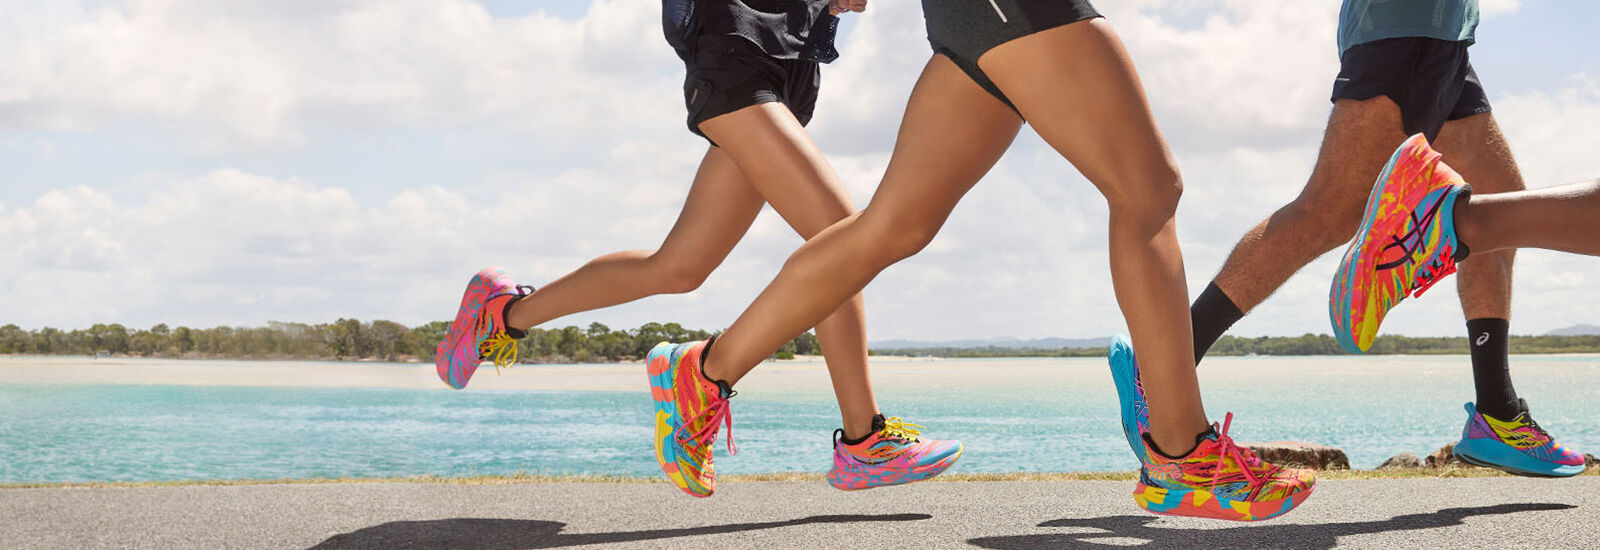 ASICS | Official U.S. Site | Running Shoes and Activewear | ASICS